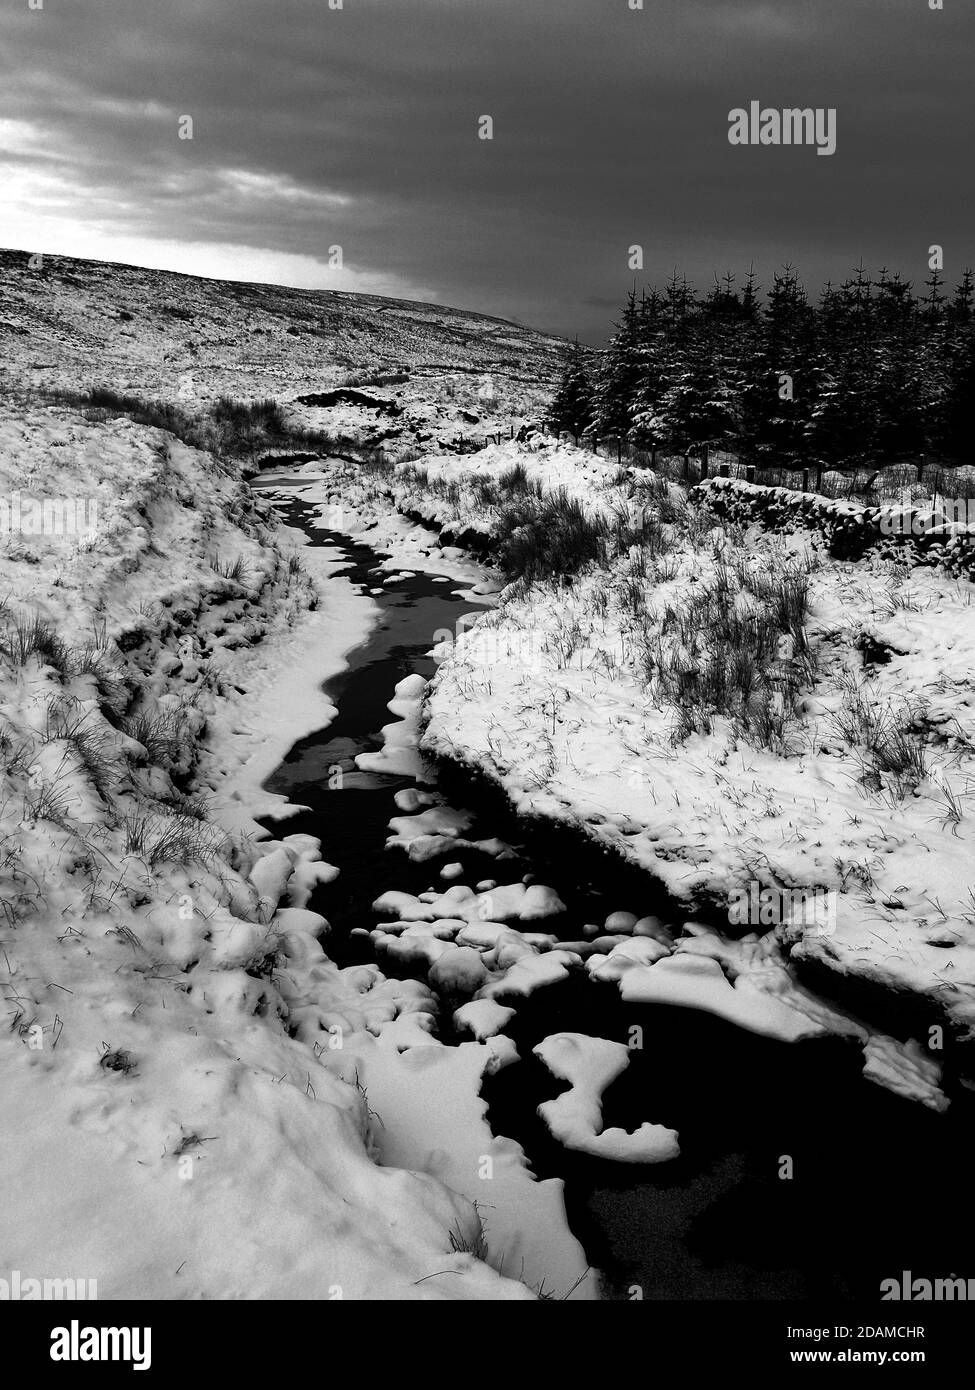 A wintry scene of the North Rotten Burn, which is situated in the Clyde Muirshiel Regional Park in Scotland. Stock Photo